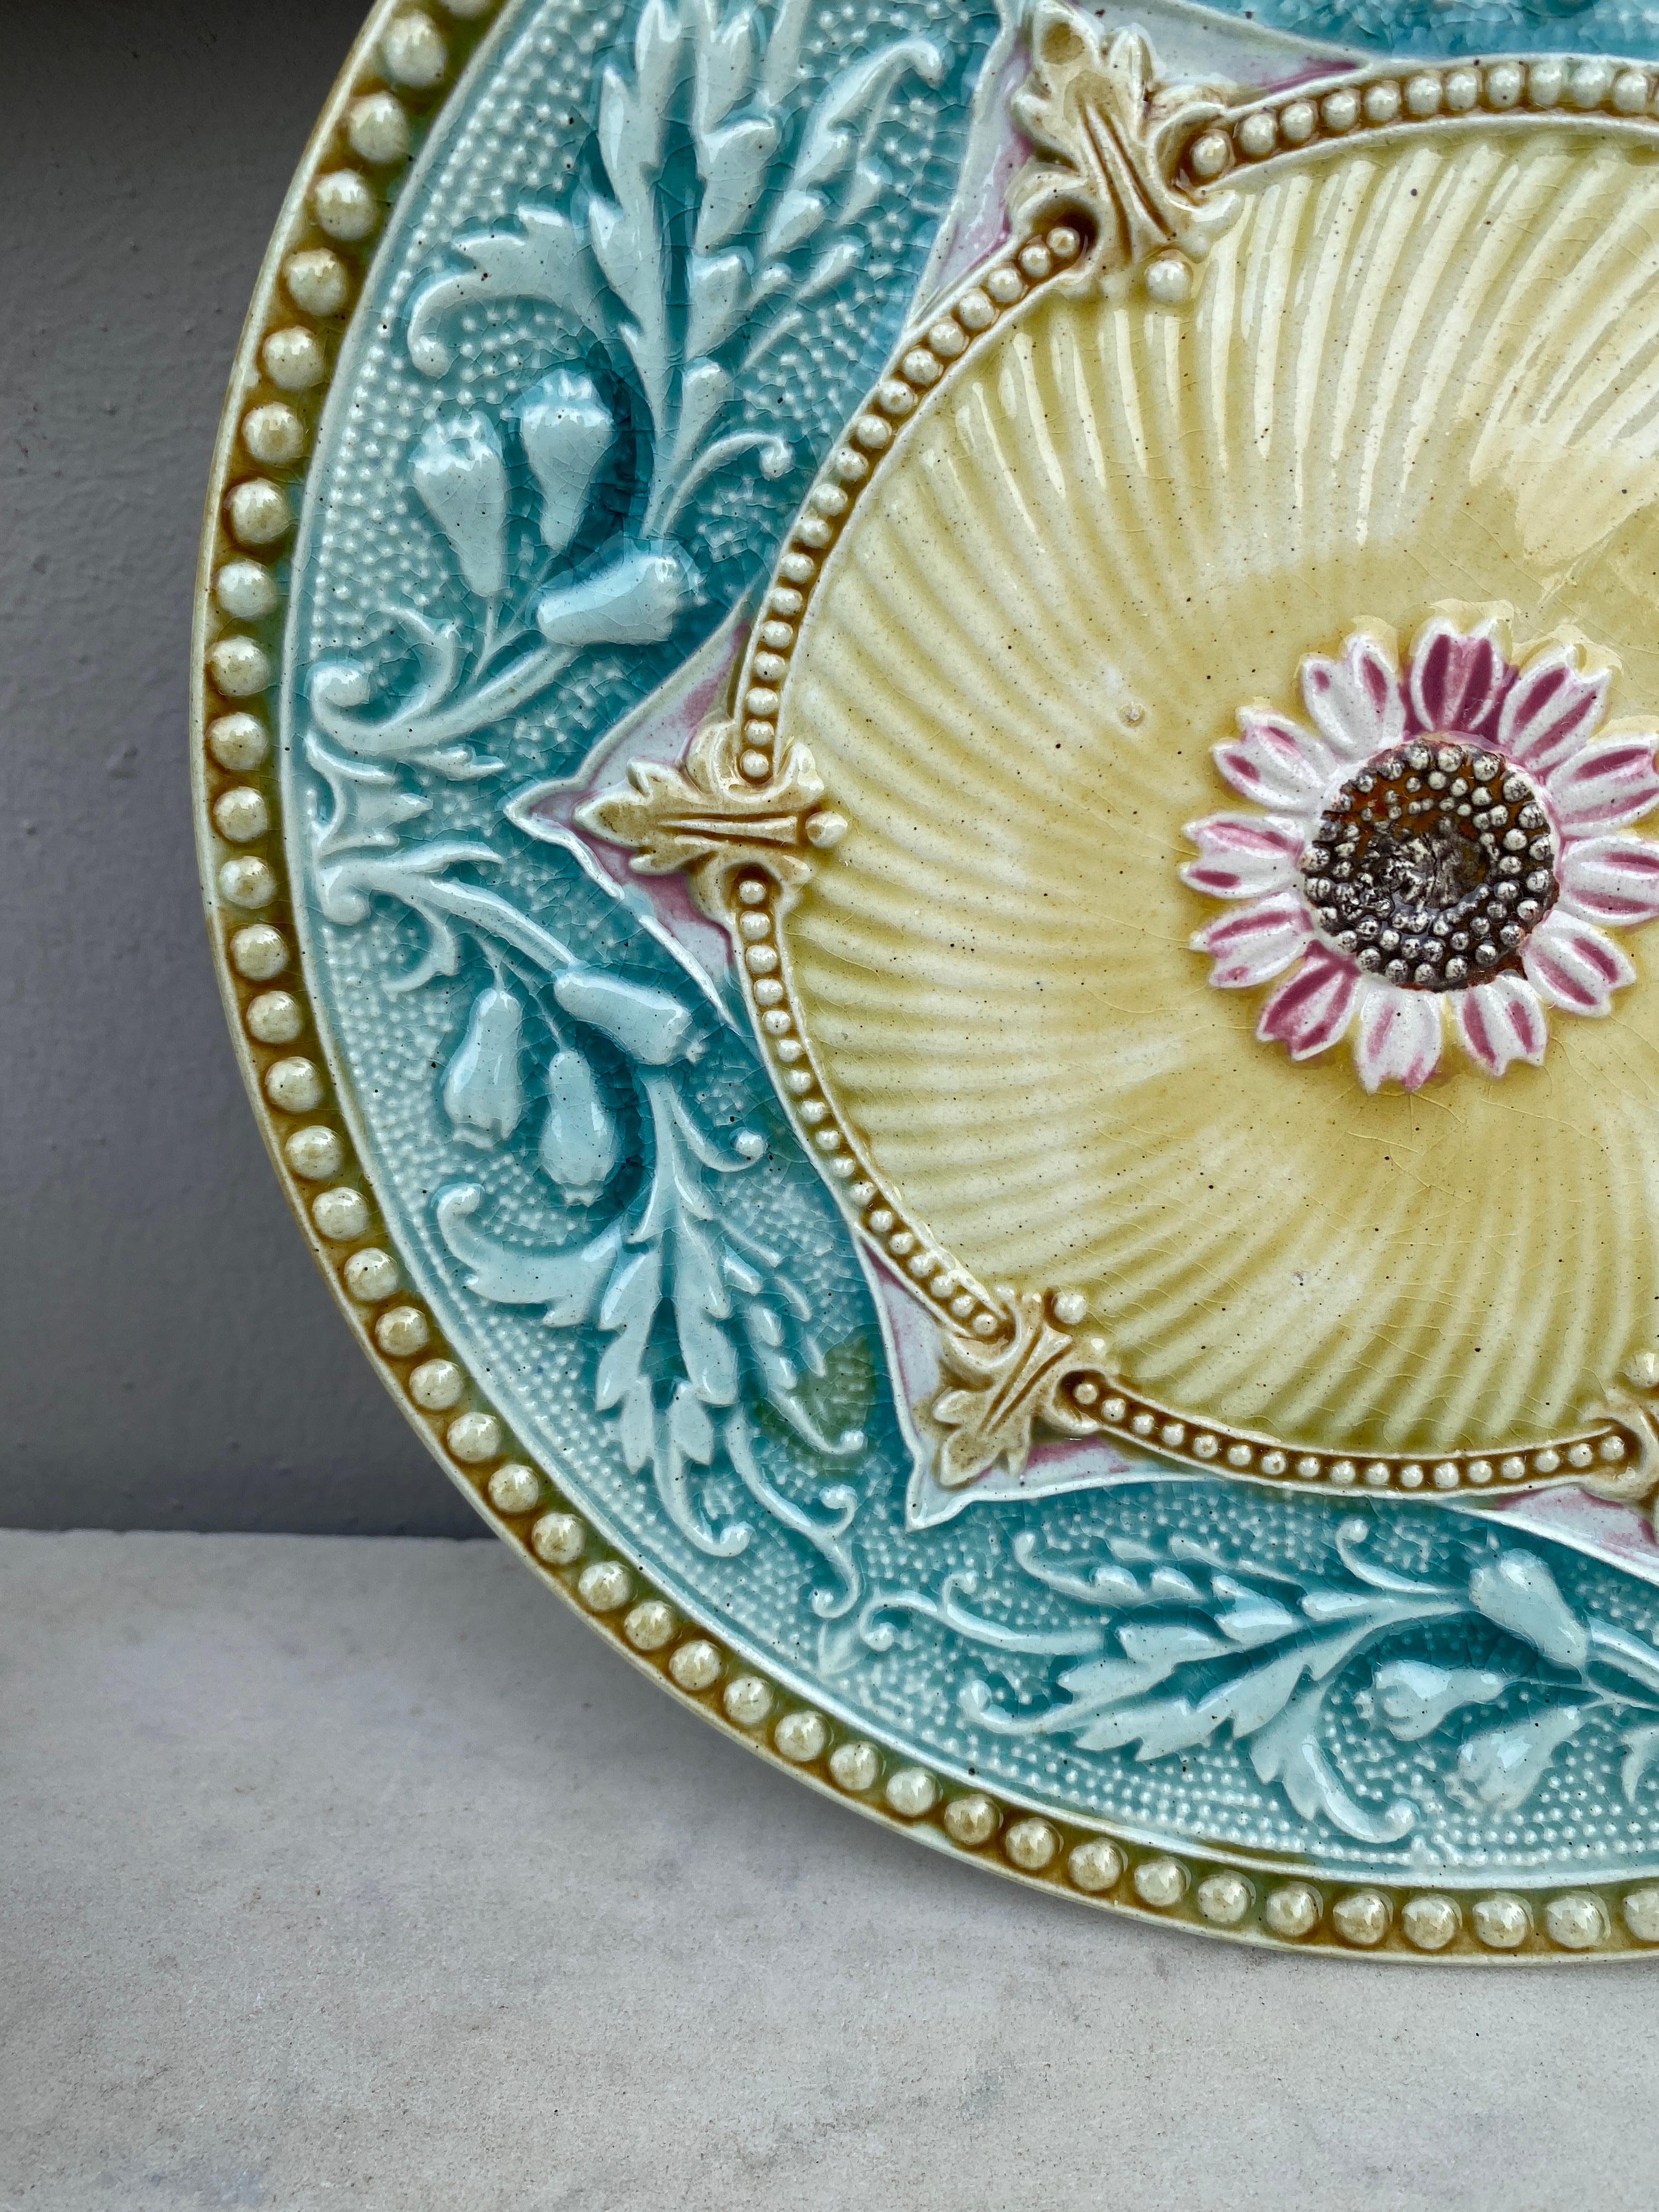 Lovely colorful French Majolica plate with flowers and acanthus leaves Orchies, circa 1890.